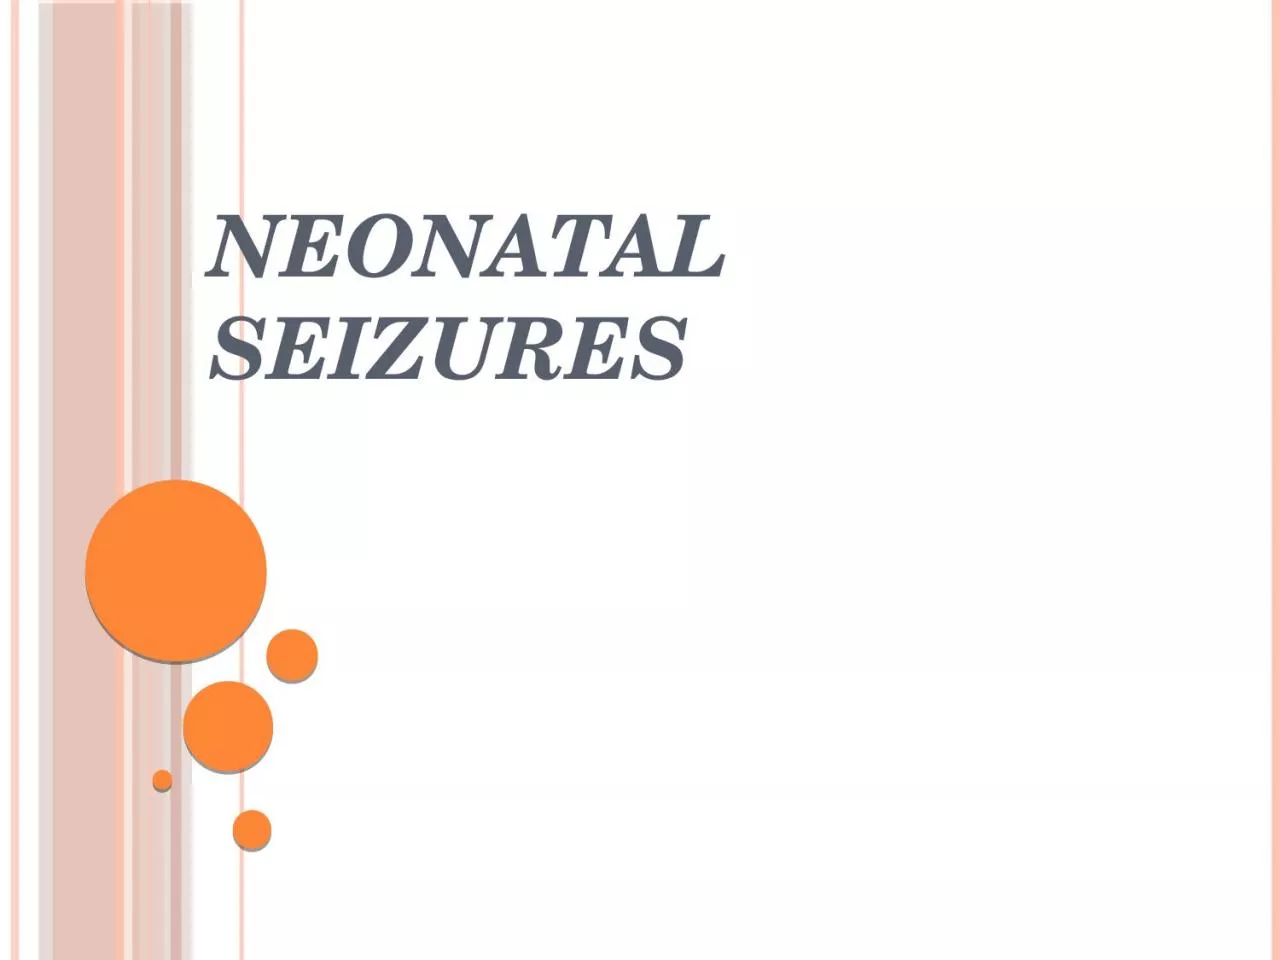 Neonatal Seizures    Seizures are possibly the most important and common indicator of